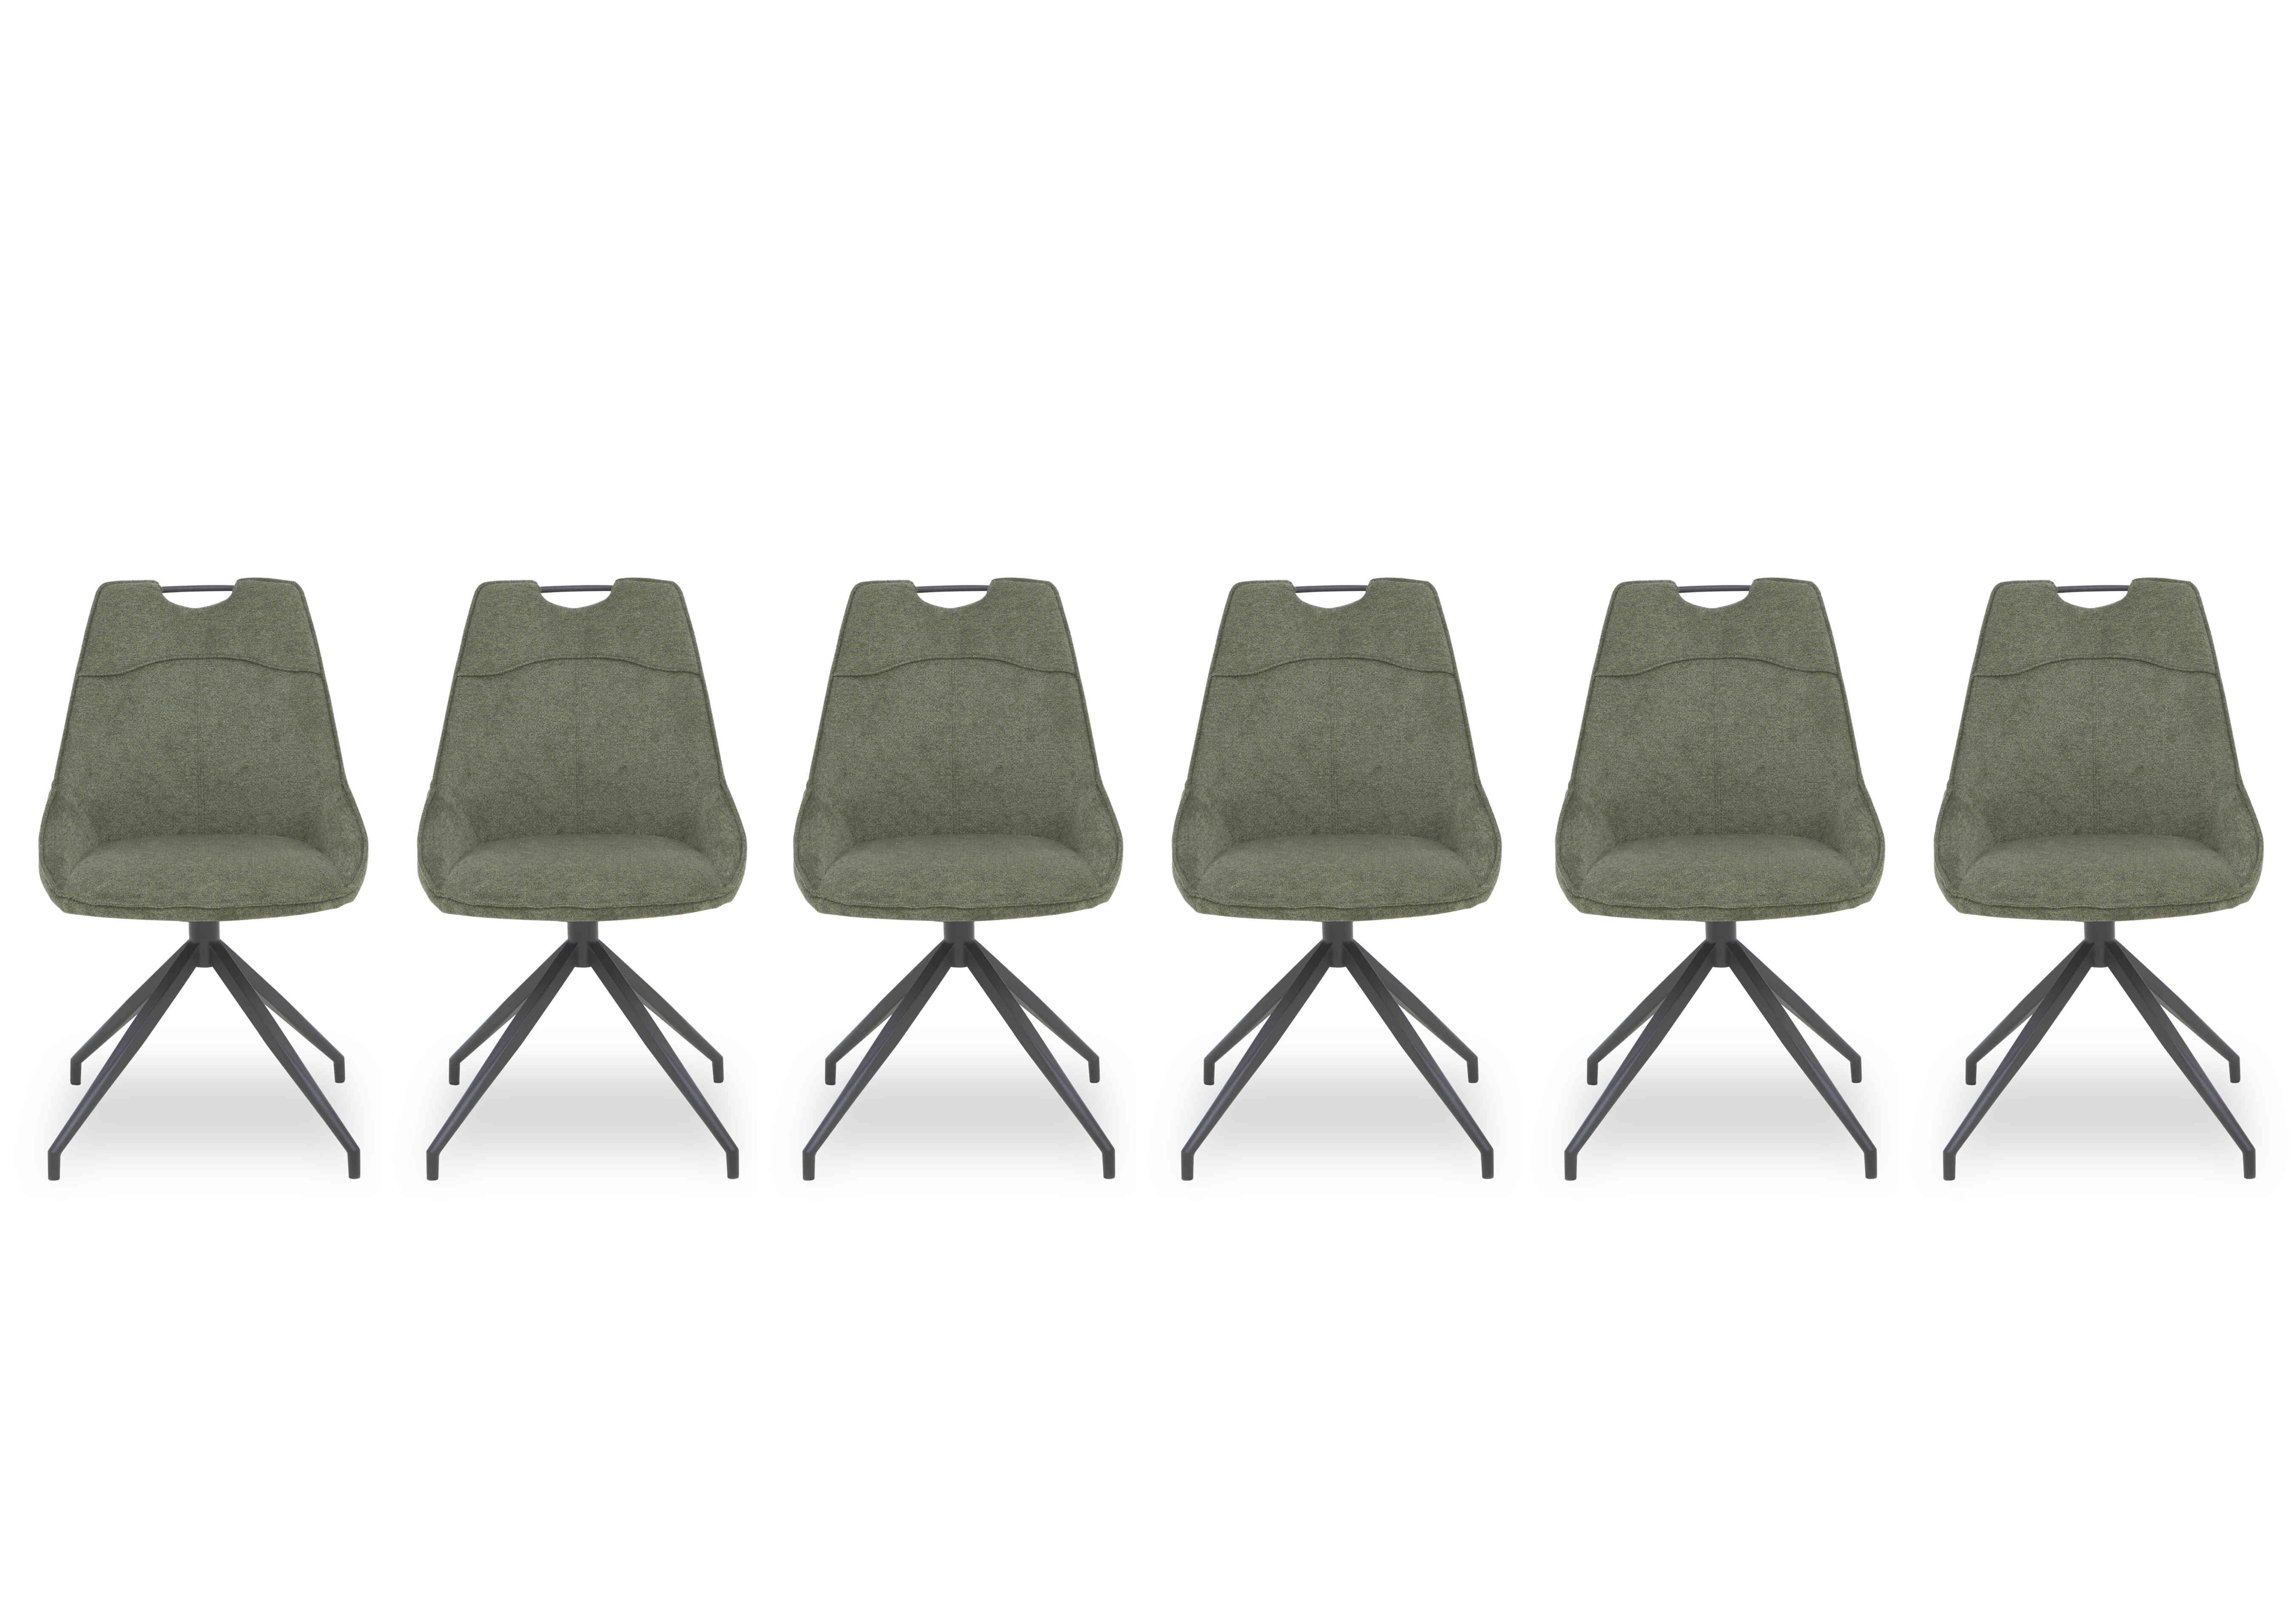 Pedro Set of 6 Fabric Swivel Dining Chairs in Green on Furniture Village